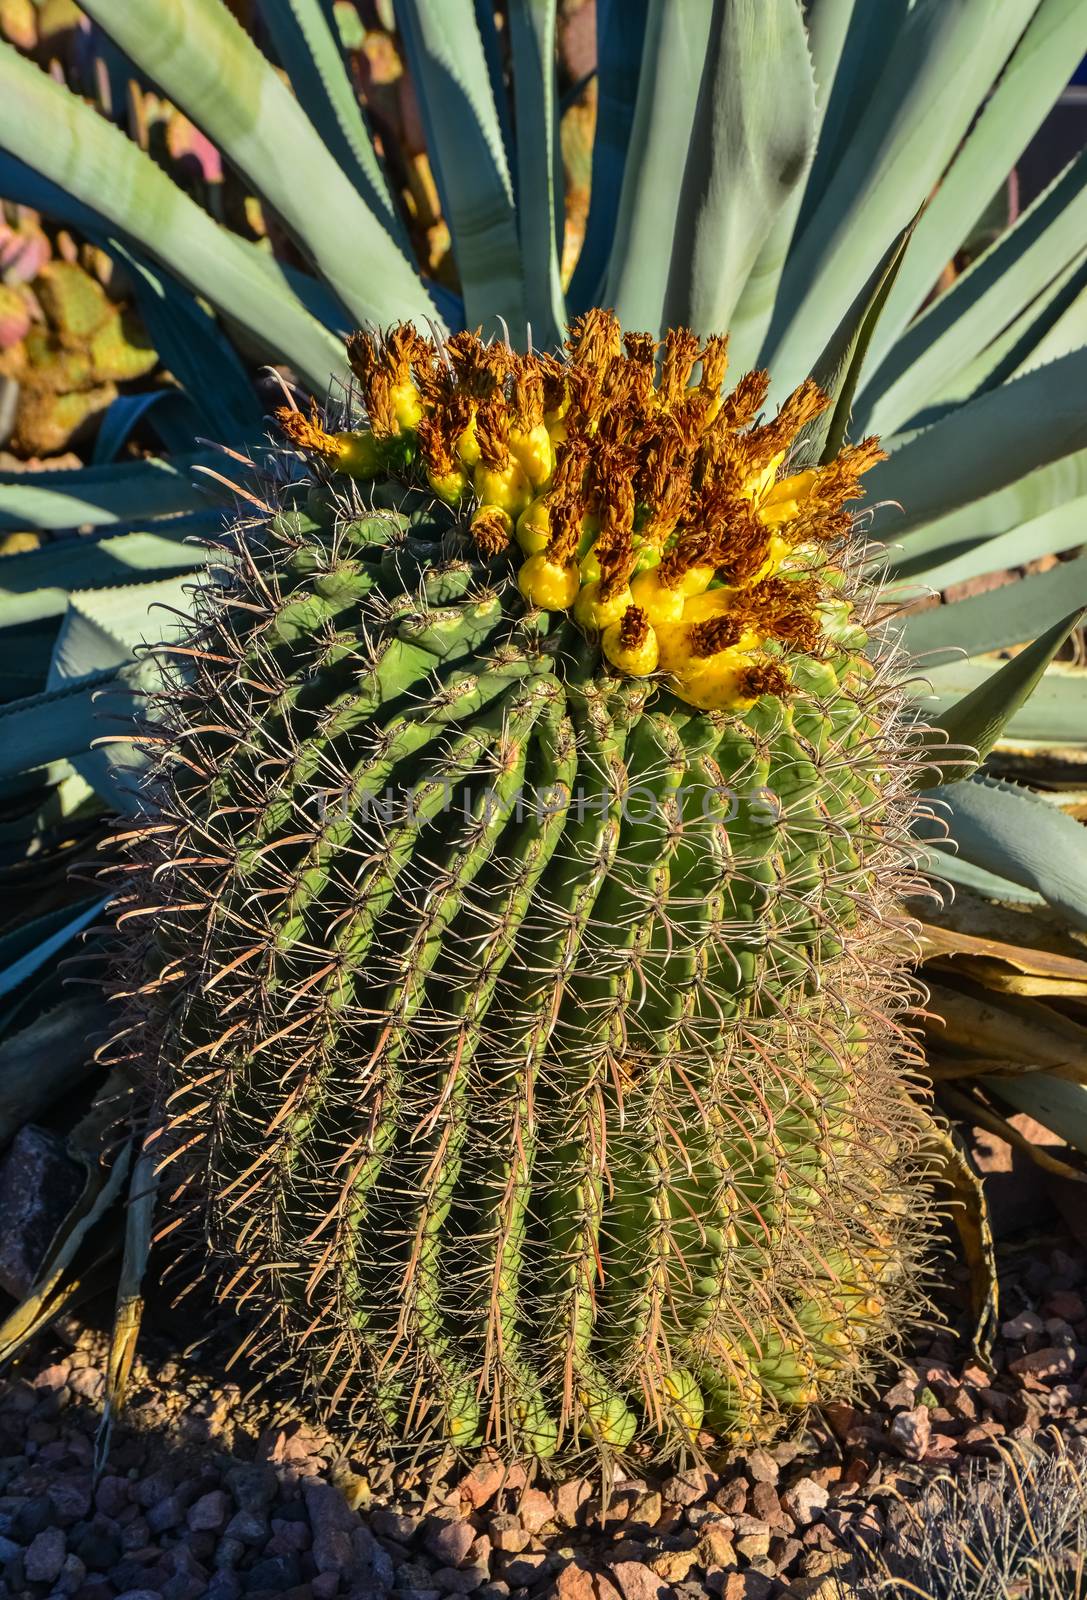 Yellow fruits with seeds on top of a large cactus Ferocactus. Ar by Hydrobiolog